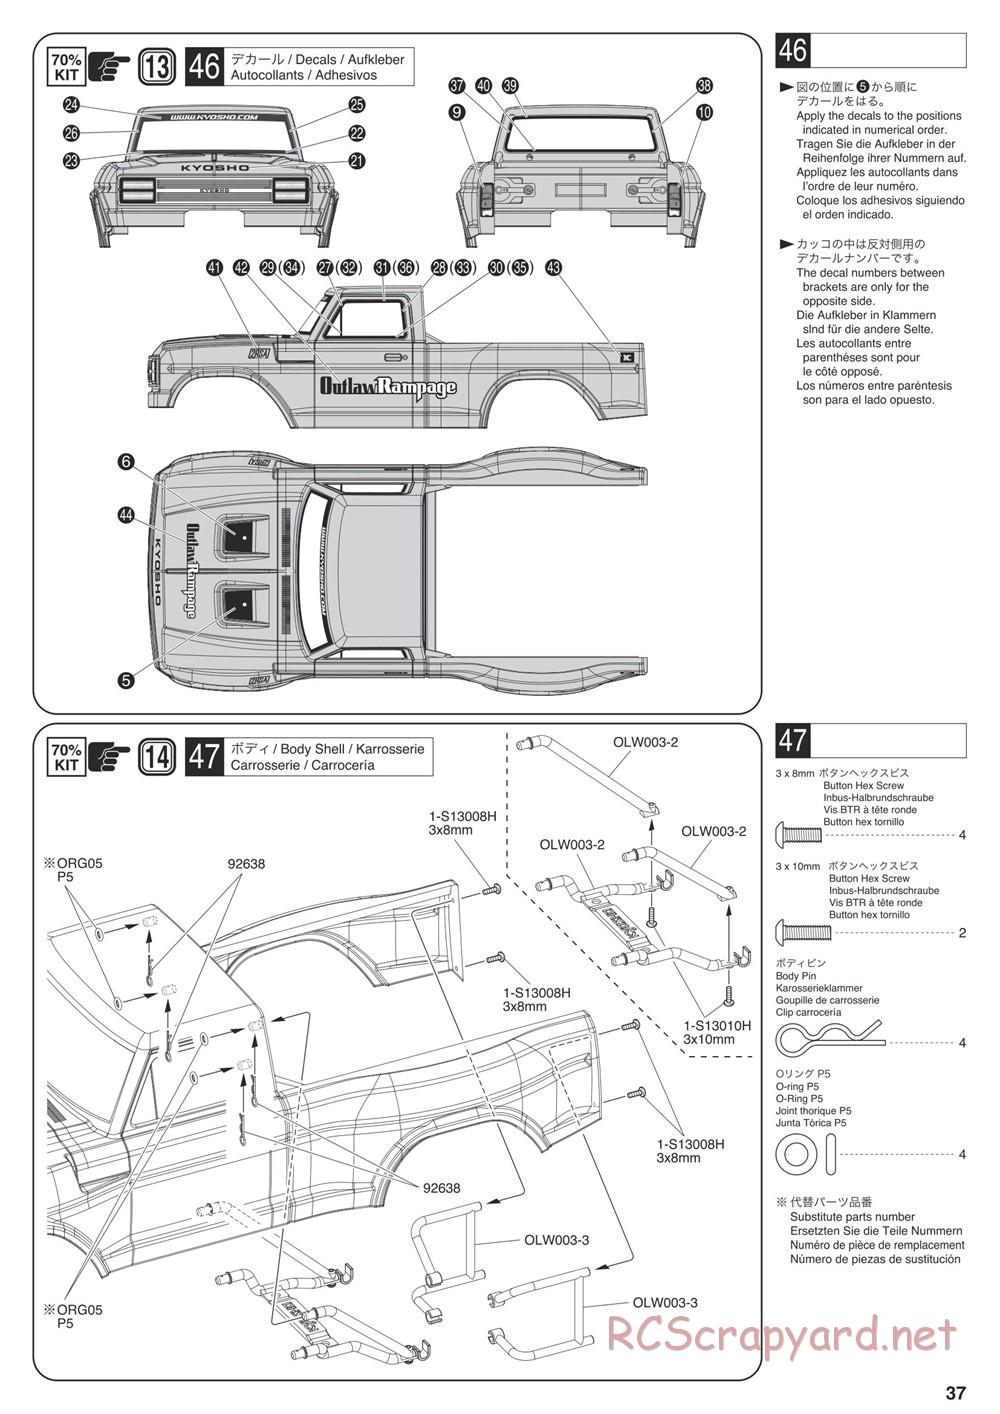 Kyosho - Outlaw Rampage Pro - Manual - Page 37